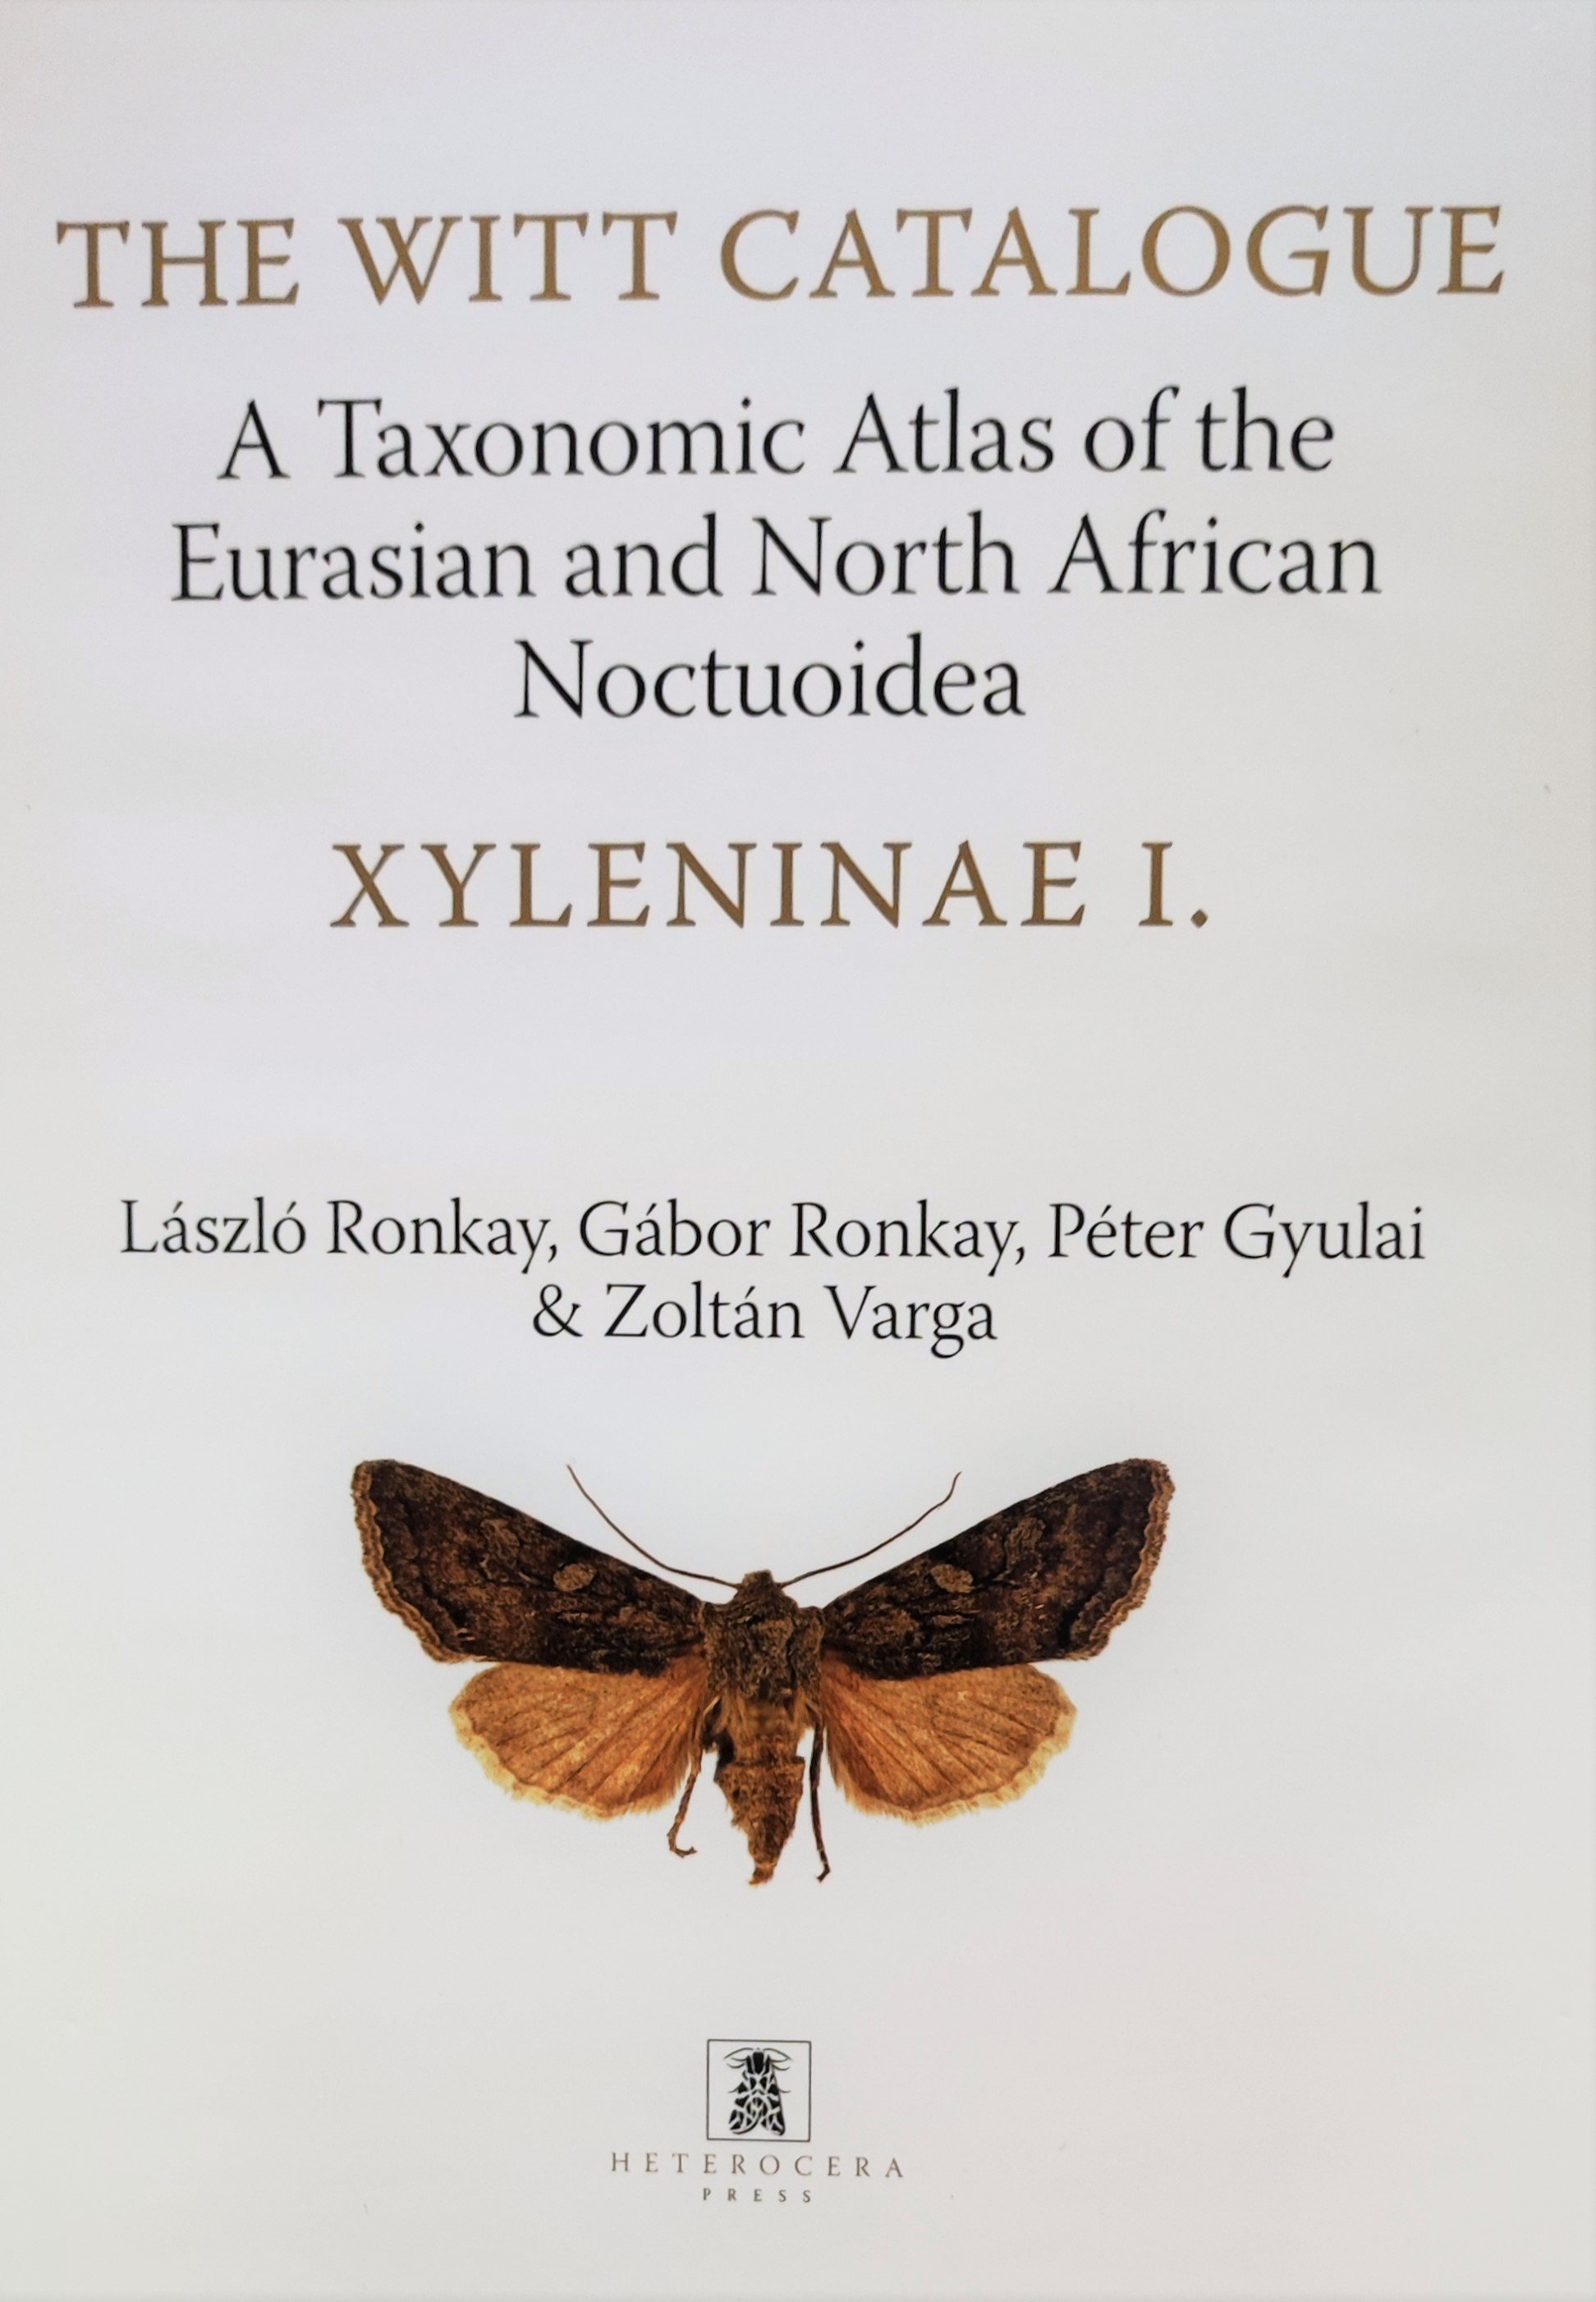 The Witt Catalogue: A Taxonomic Atlas of the Eurasian and North African Noctuoidea. volume 9. - Xyleninae 1. (Rippl-Rónai Múzeum CC BY-NC-ND)